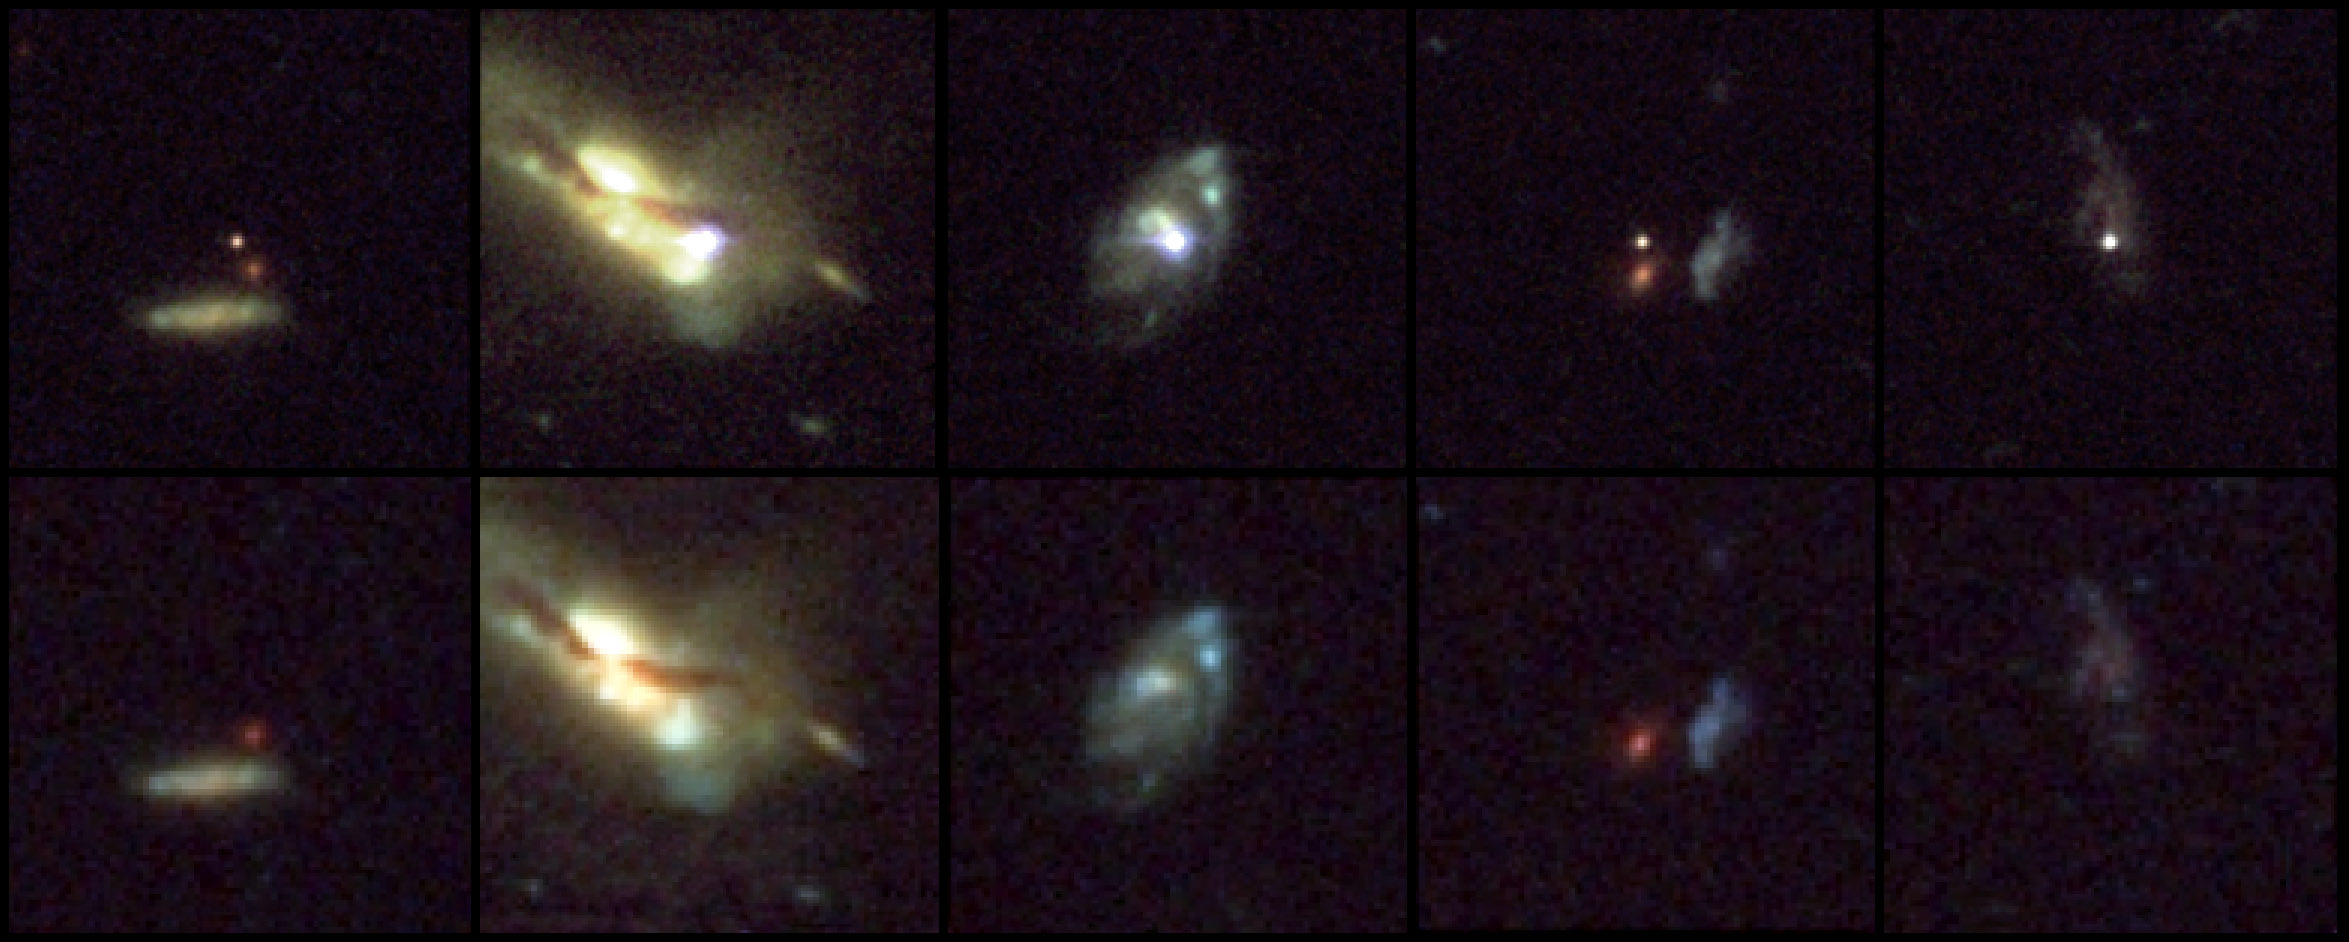 NASA's Hubble Space Telescope, reveal five supernovae, or exploding stars, and their host galaxies